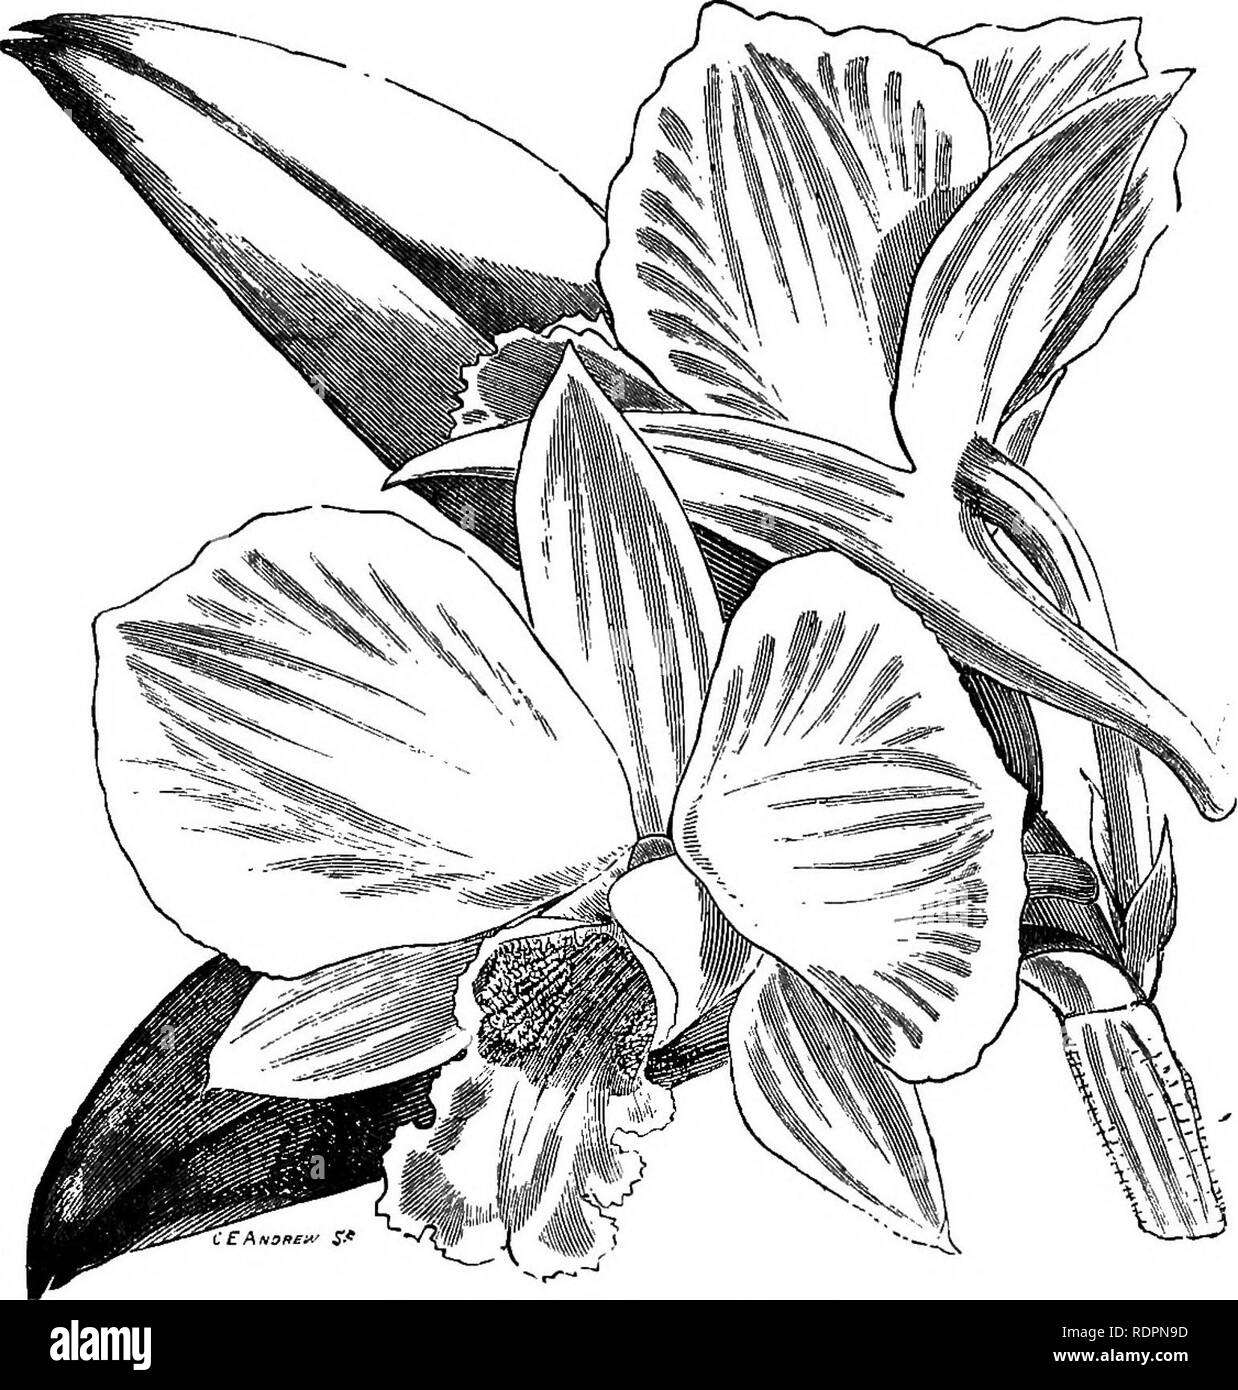 . The orchid-grower's manual, containing descriptions of the best species and varieties of orchidaceous plants in cultivation ... Orchids. DENDROBIUM. 343 spring and summer. This, as well as the preceding species, succeeds best in the cool house. It is a grand exhibition plant, and its flowers last in perfection for several weeks if kept from the damp.âMouhnein. pli Fia.âFloi-hf and Pom., 1869,p. 187, with fig. ; Orc?iid Album, v. t. 221 â L'Orchido- di;hS&amp;,^.l%%: Gardening World, iii. â p. irZ. D. JAPONICUM. DENDROBIUM JAMESIANUM. (From tlio Gardeners' Chronicle.') -See D. MONiLiroKME. D Stock Photo